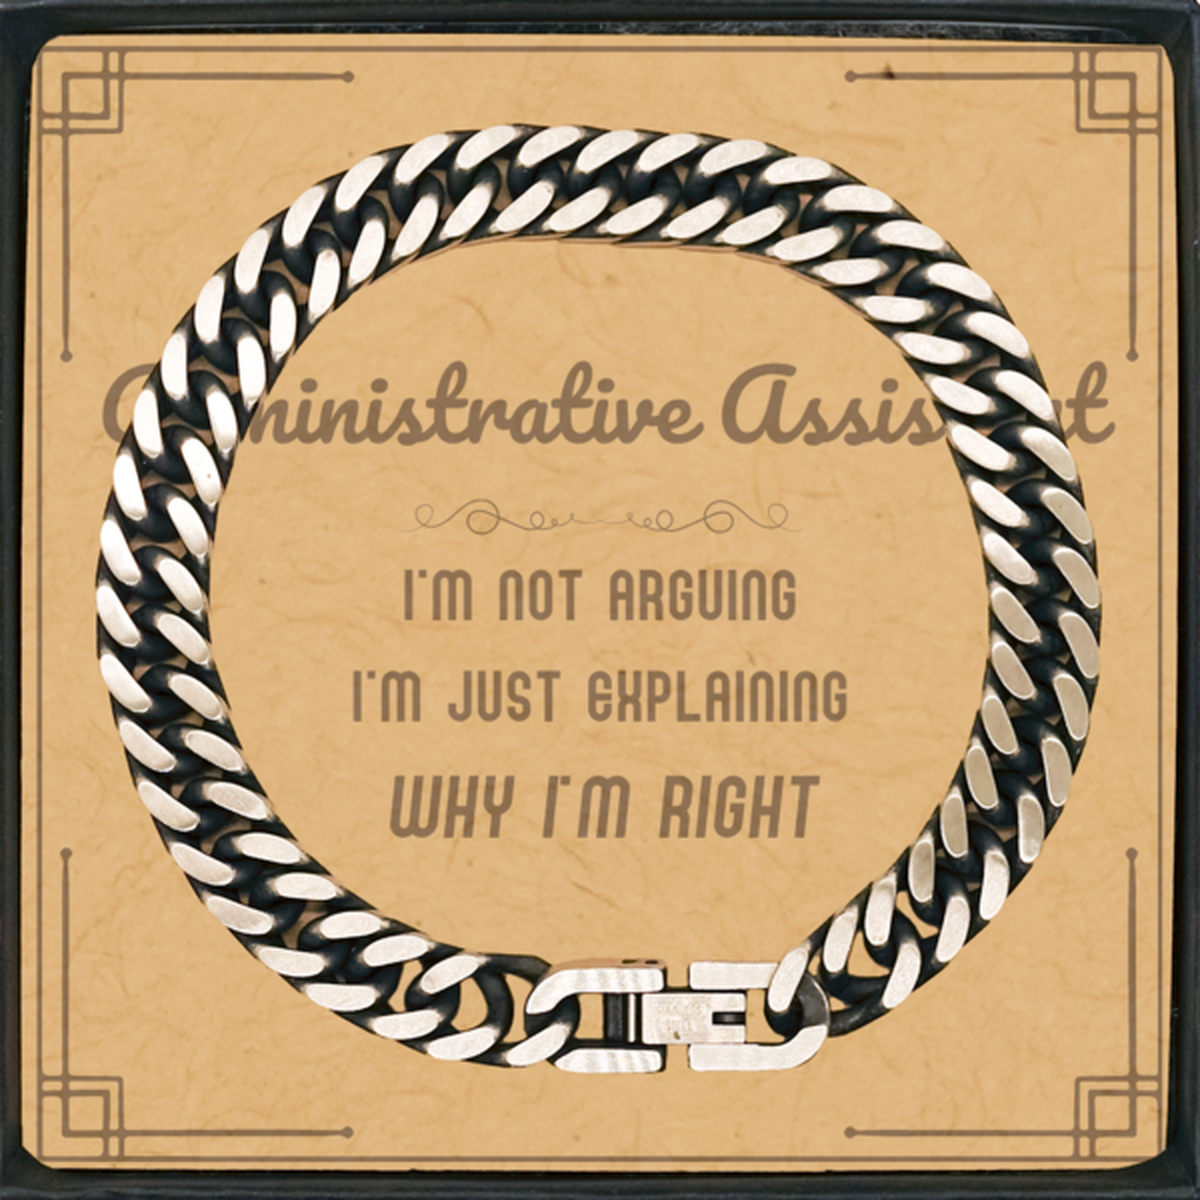 Administrative Assistant I'm not Arguing. I'm Just Explaining Why I'm RIGHT Cuban Link Chain Bracelet, Funny Saying Quote Administrative Assistant Gifts For Administrative Assistant Message Card Graduation Birthday Christmas Gifts for Men Women Coworker